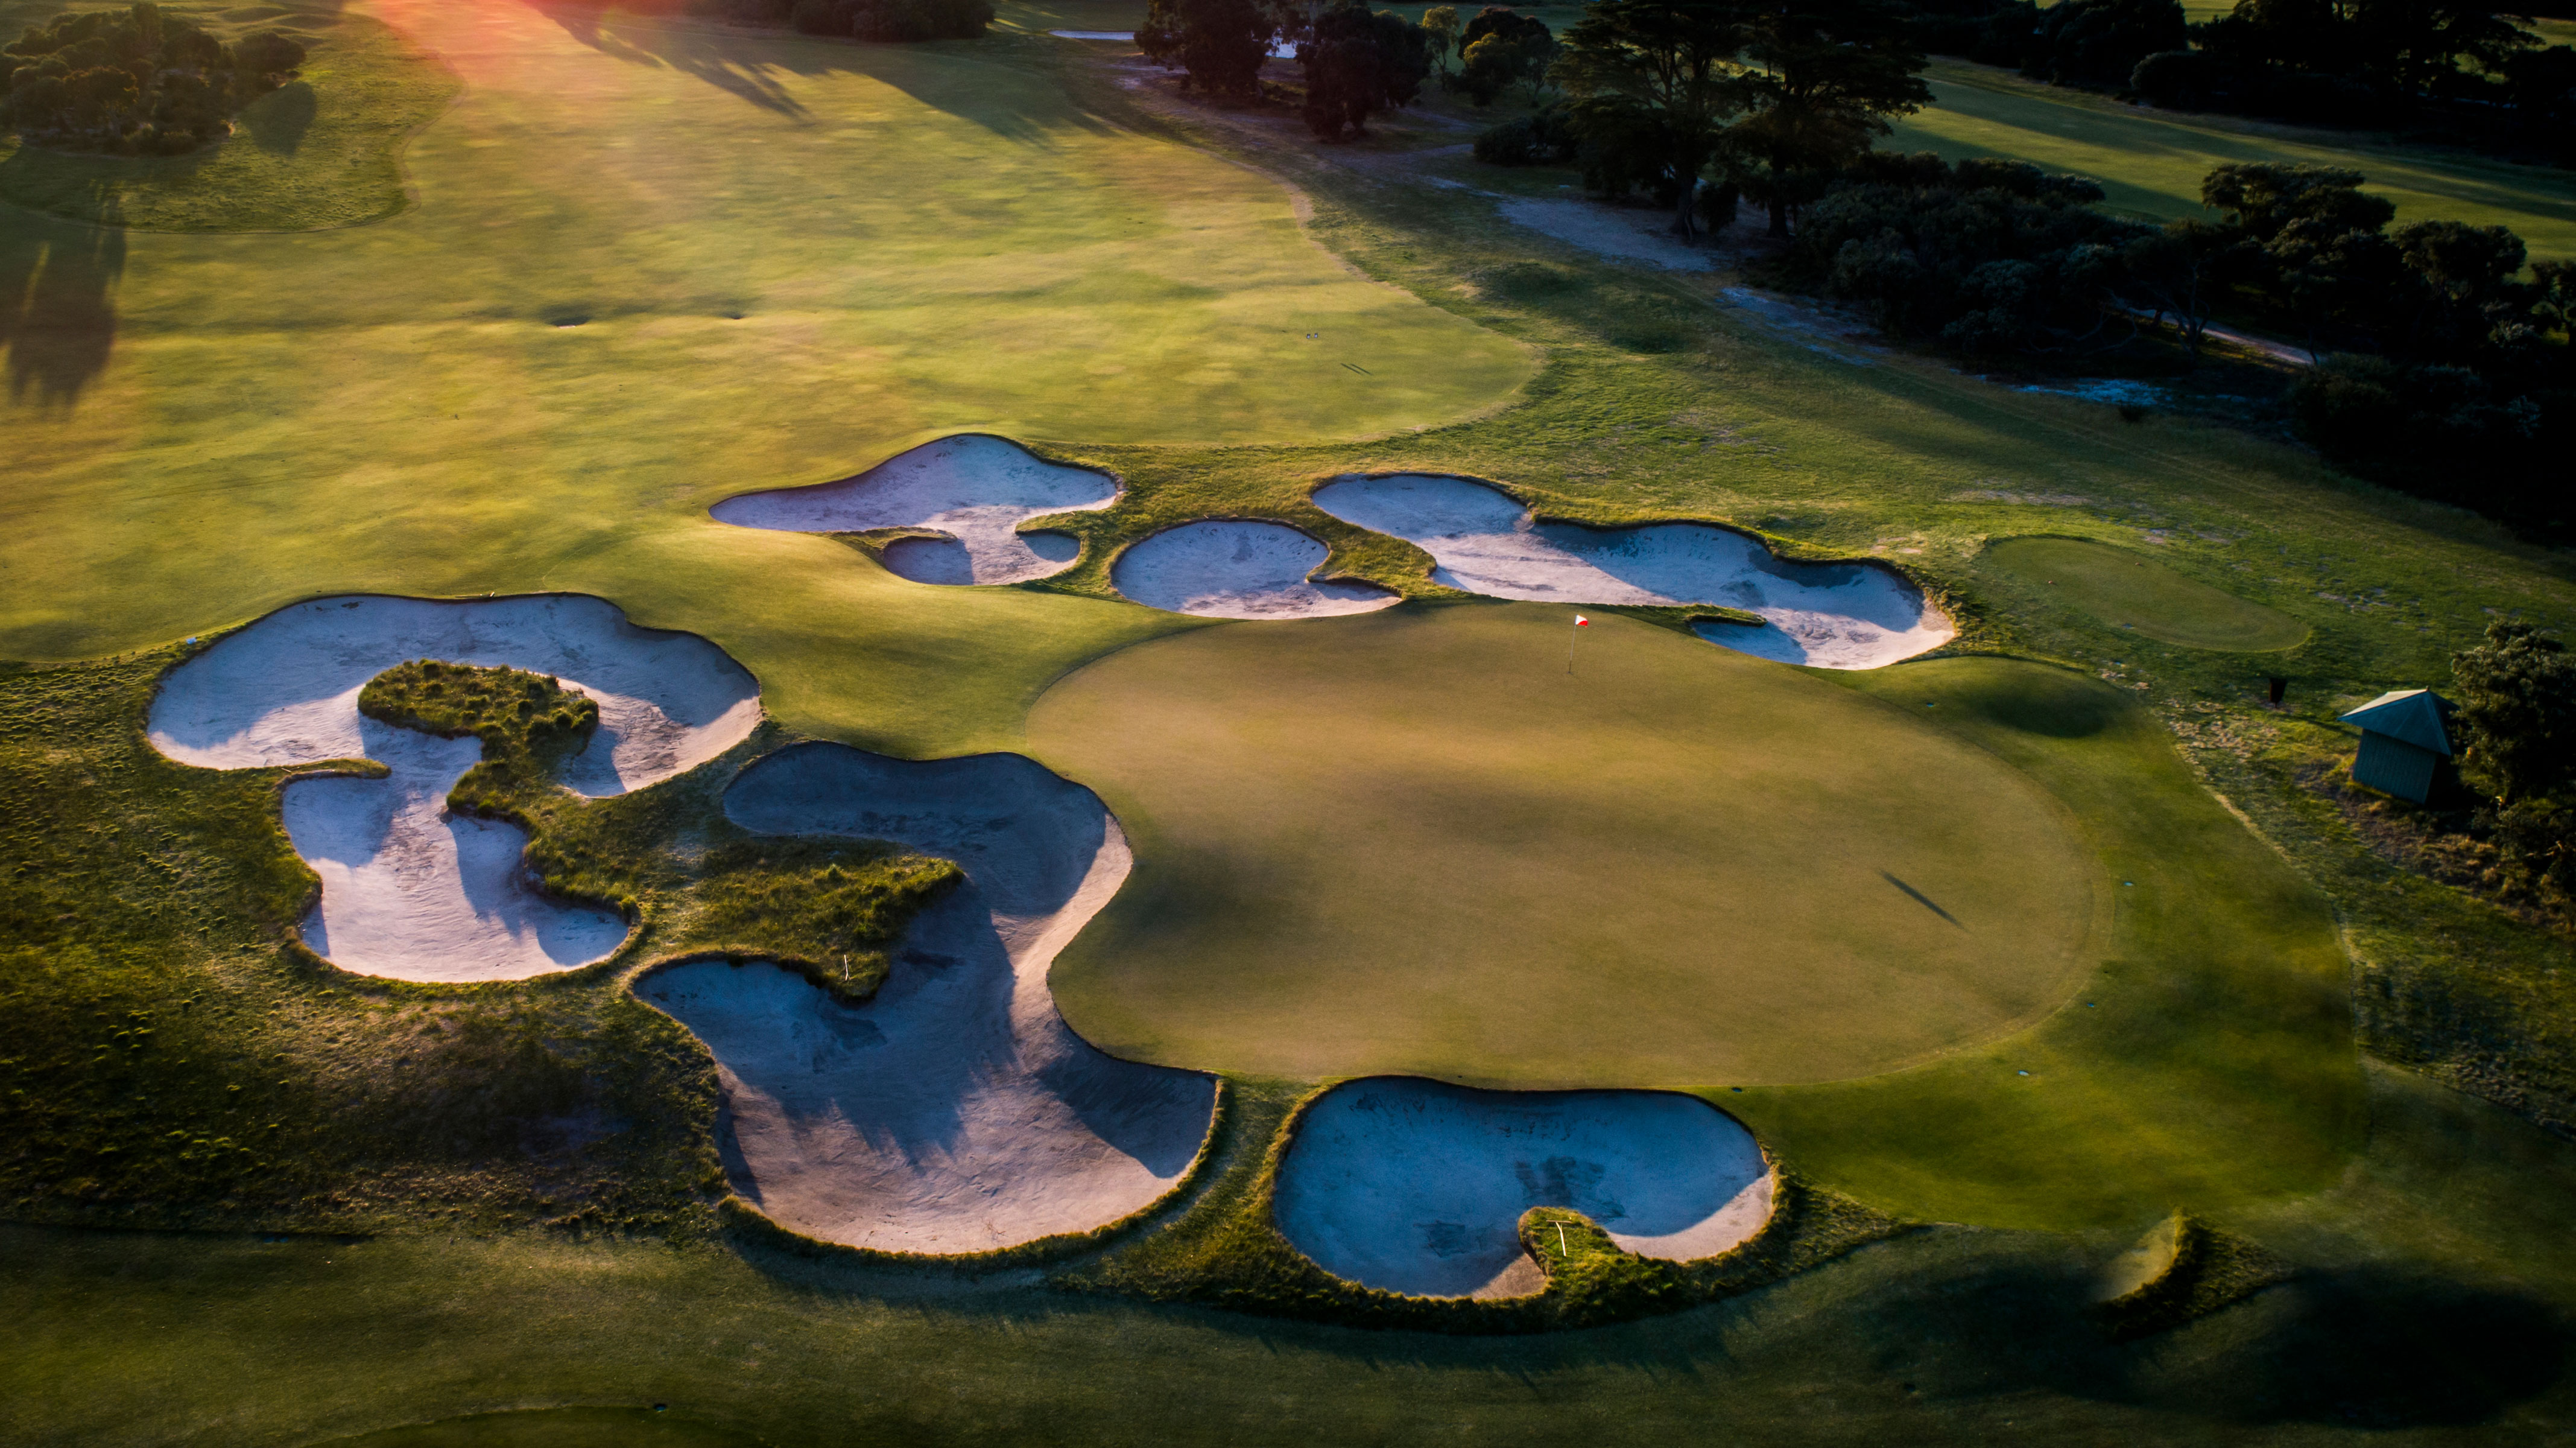 Ranking: World's 100 Greatest Golf Courses, Courses